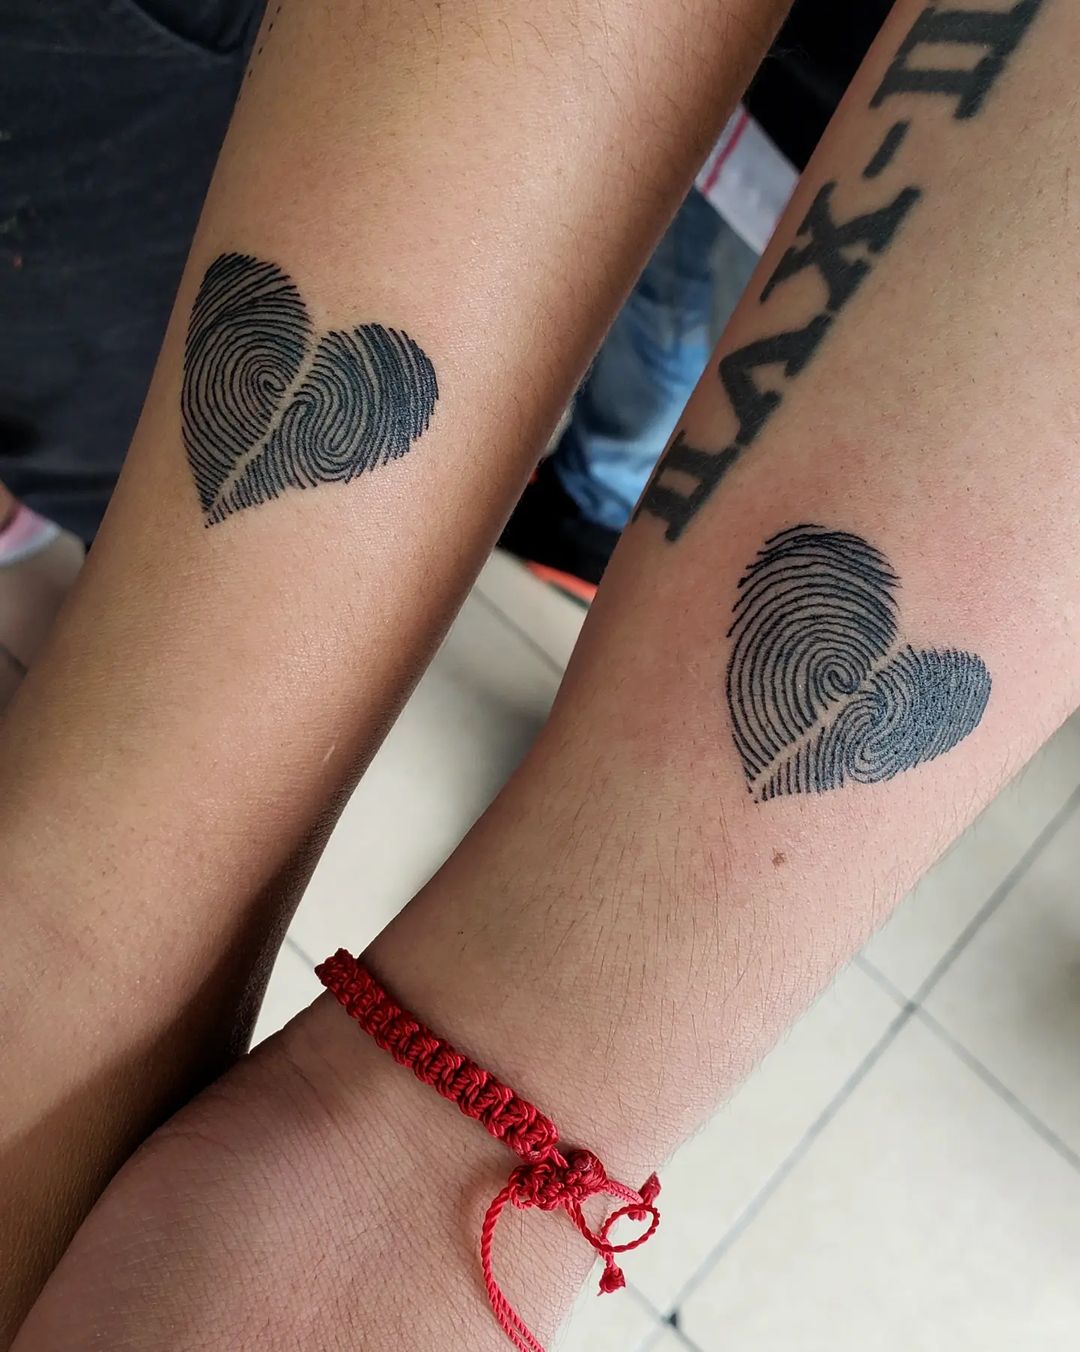 This New Tattoo Trend for Couples will Make You Fall in Love with Love   Style  Beauty